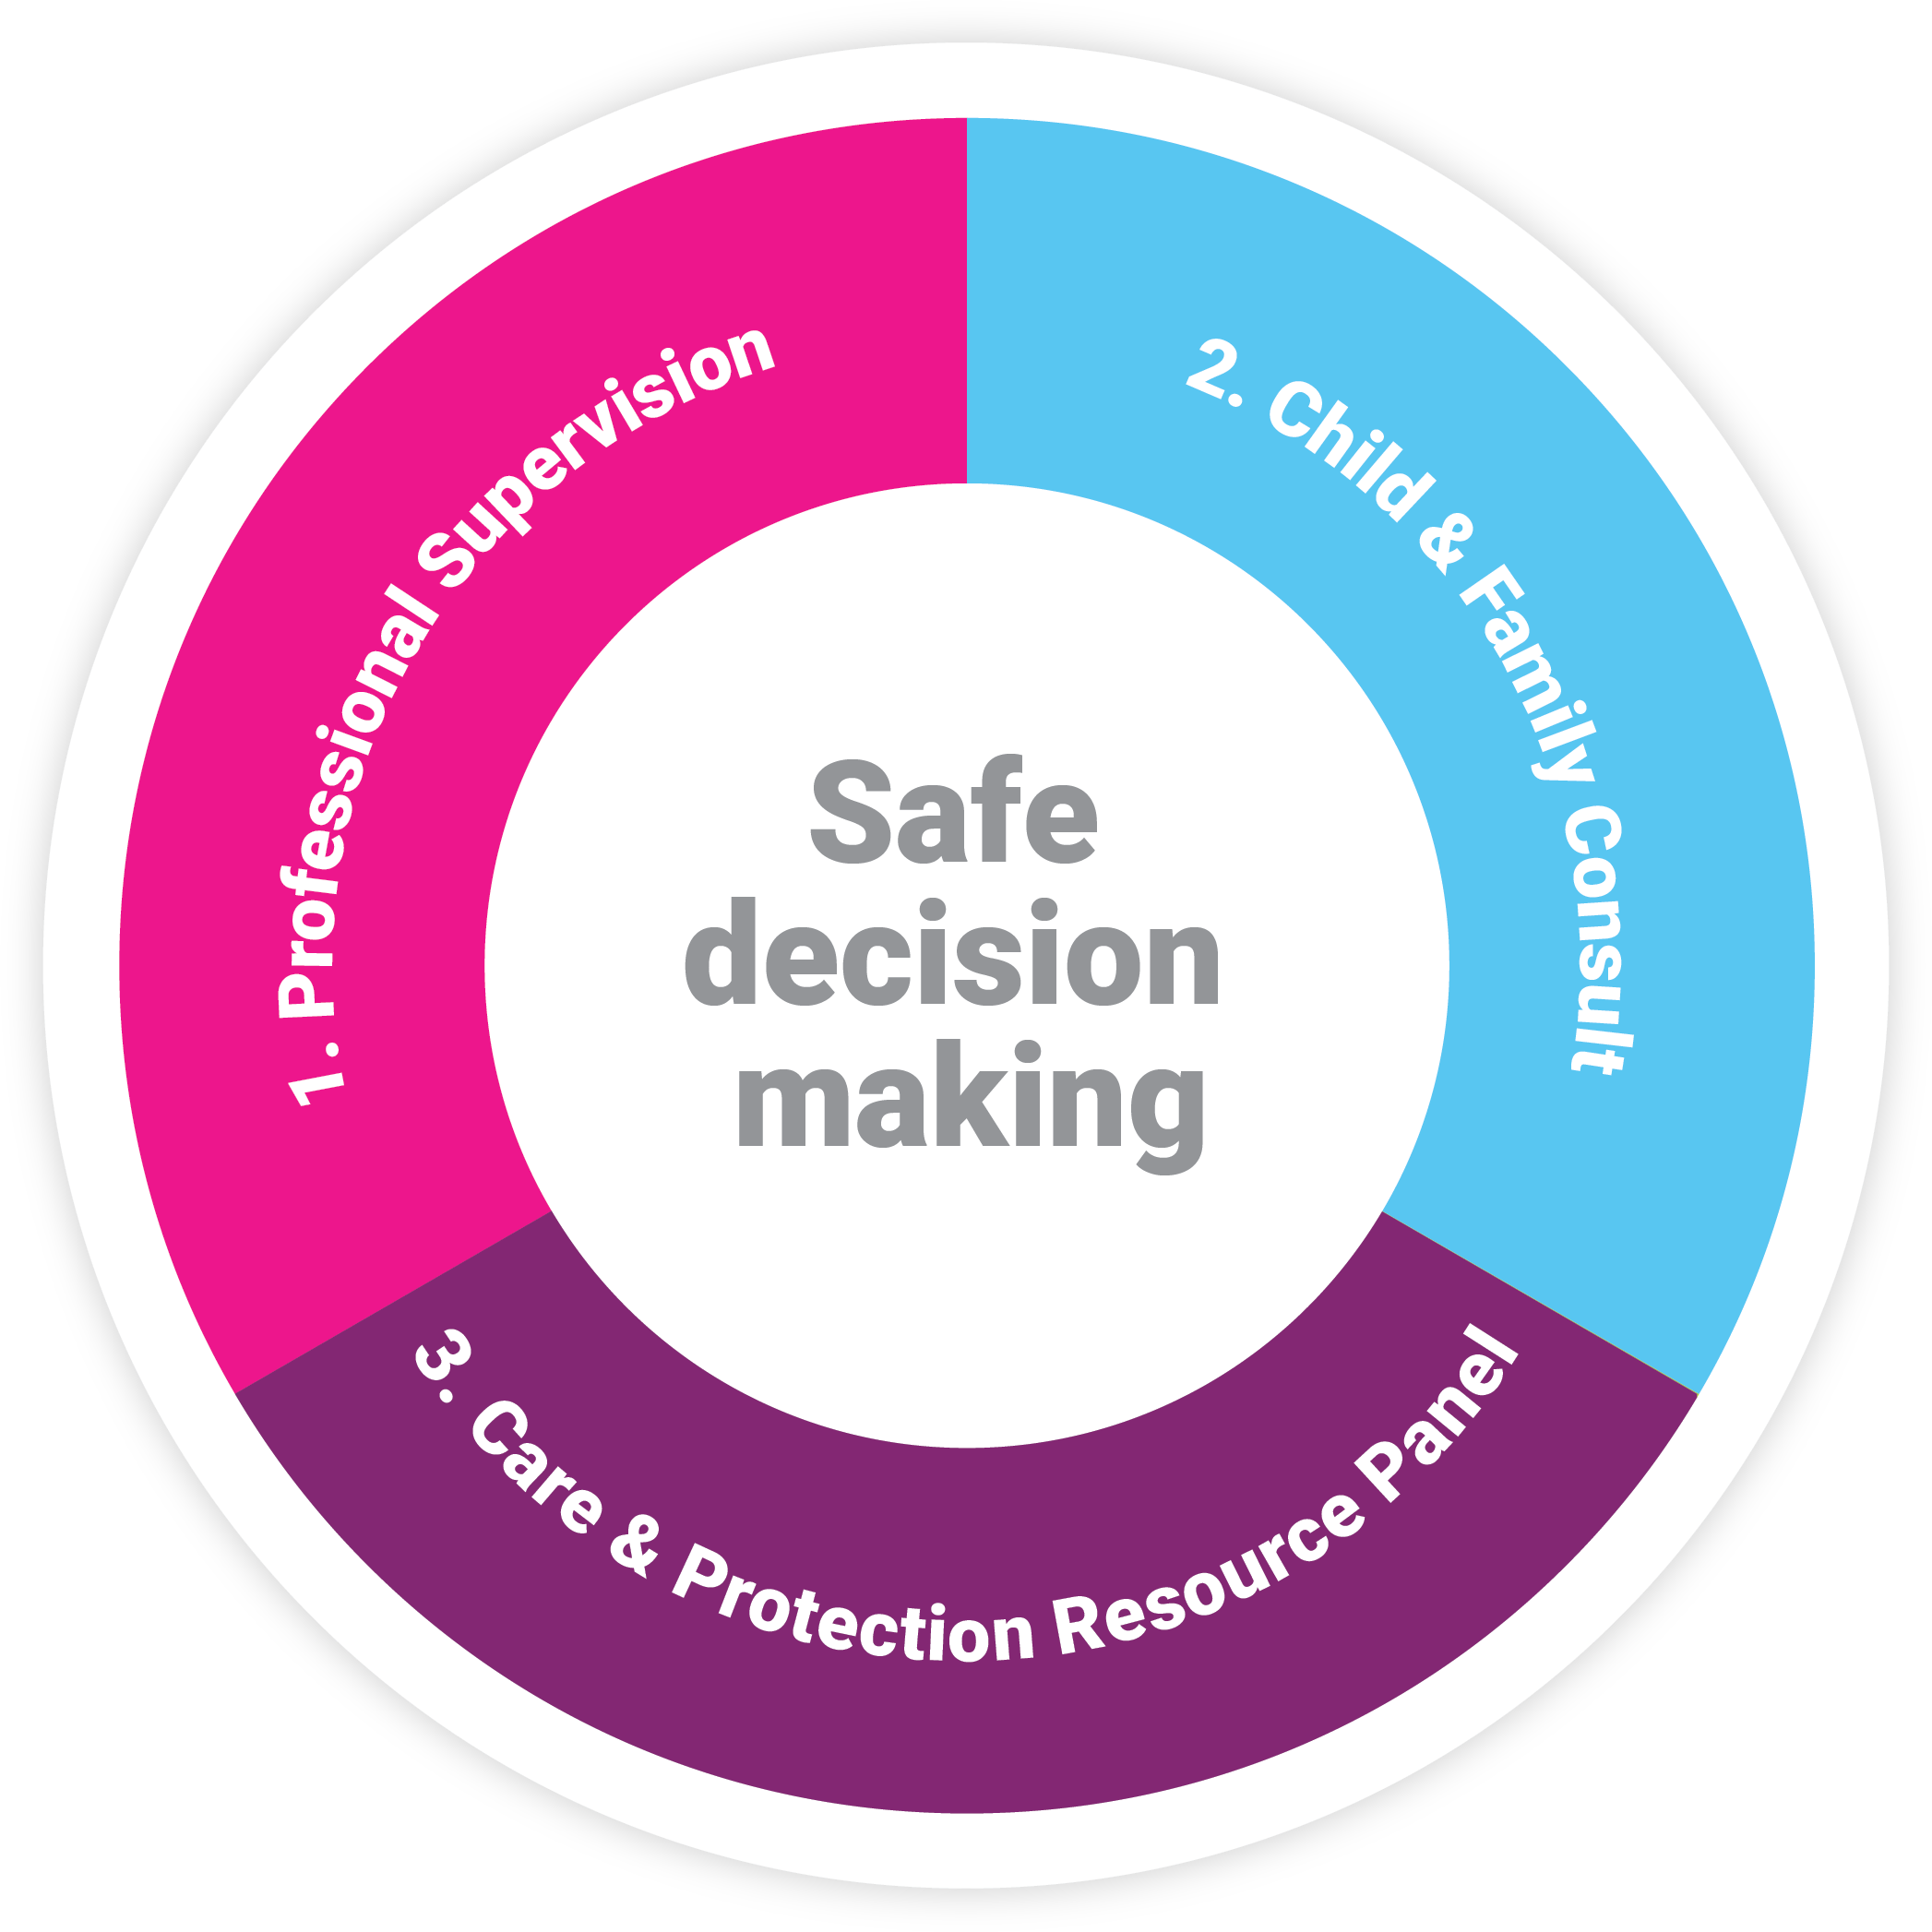 Infographic showing the three safe decision making steps